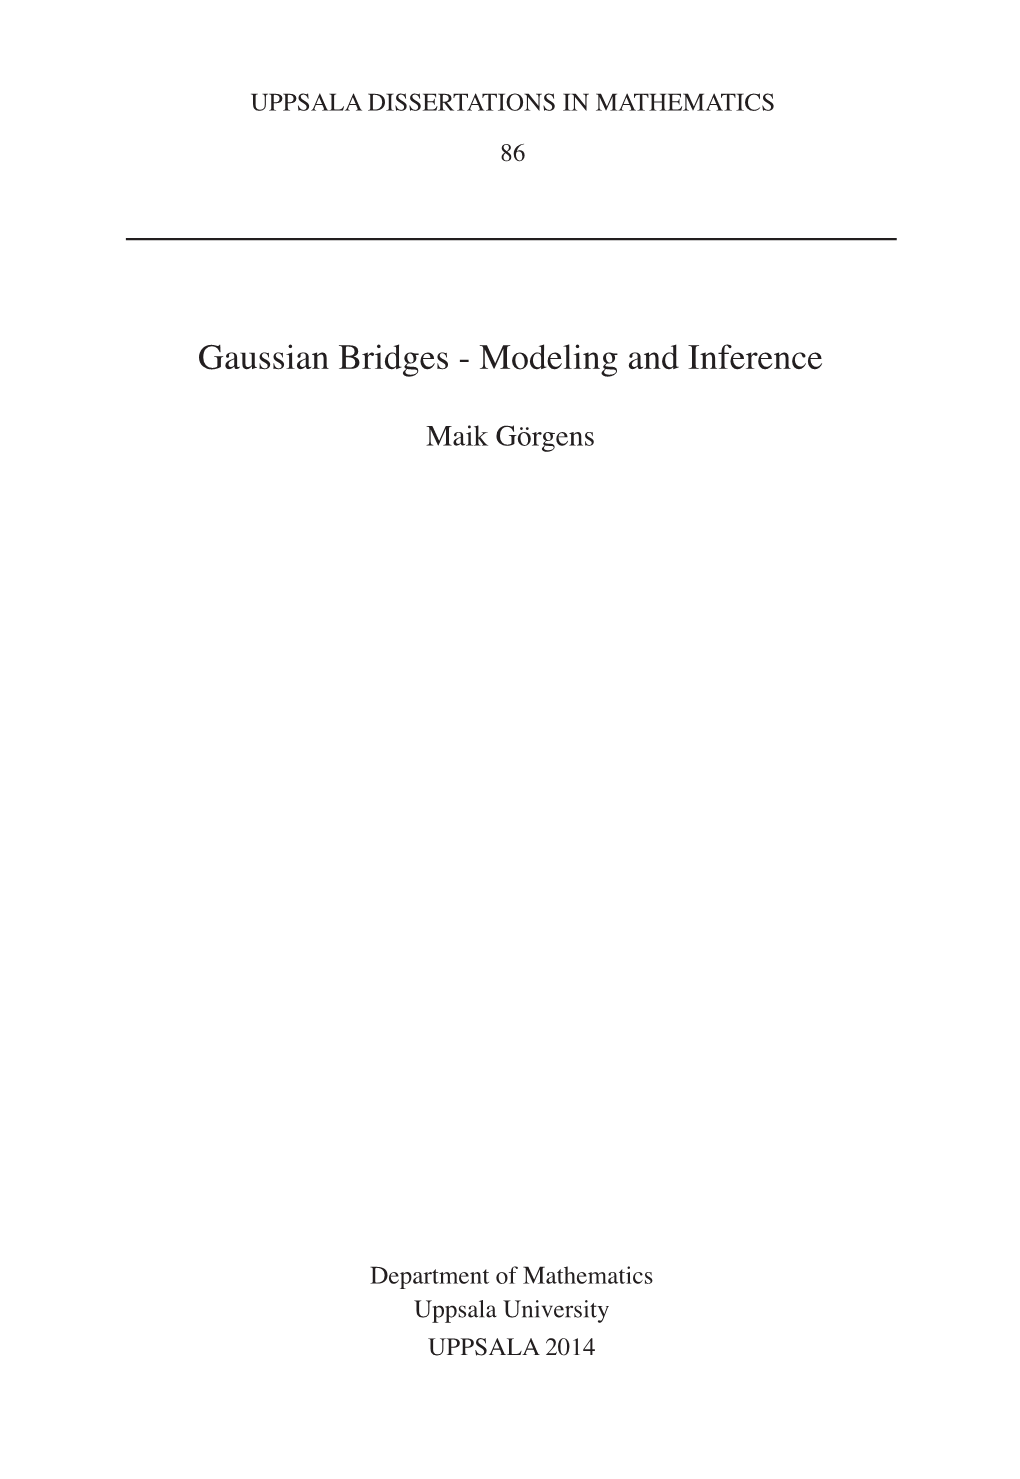 Gaussian Bridges - Modeling and Inference